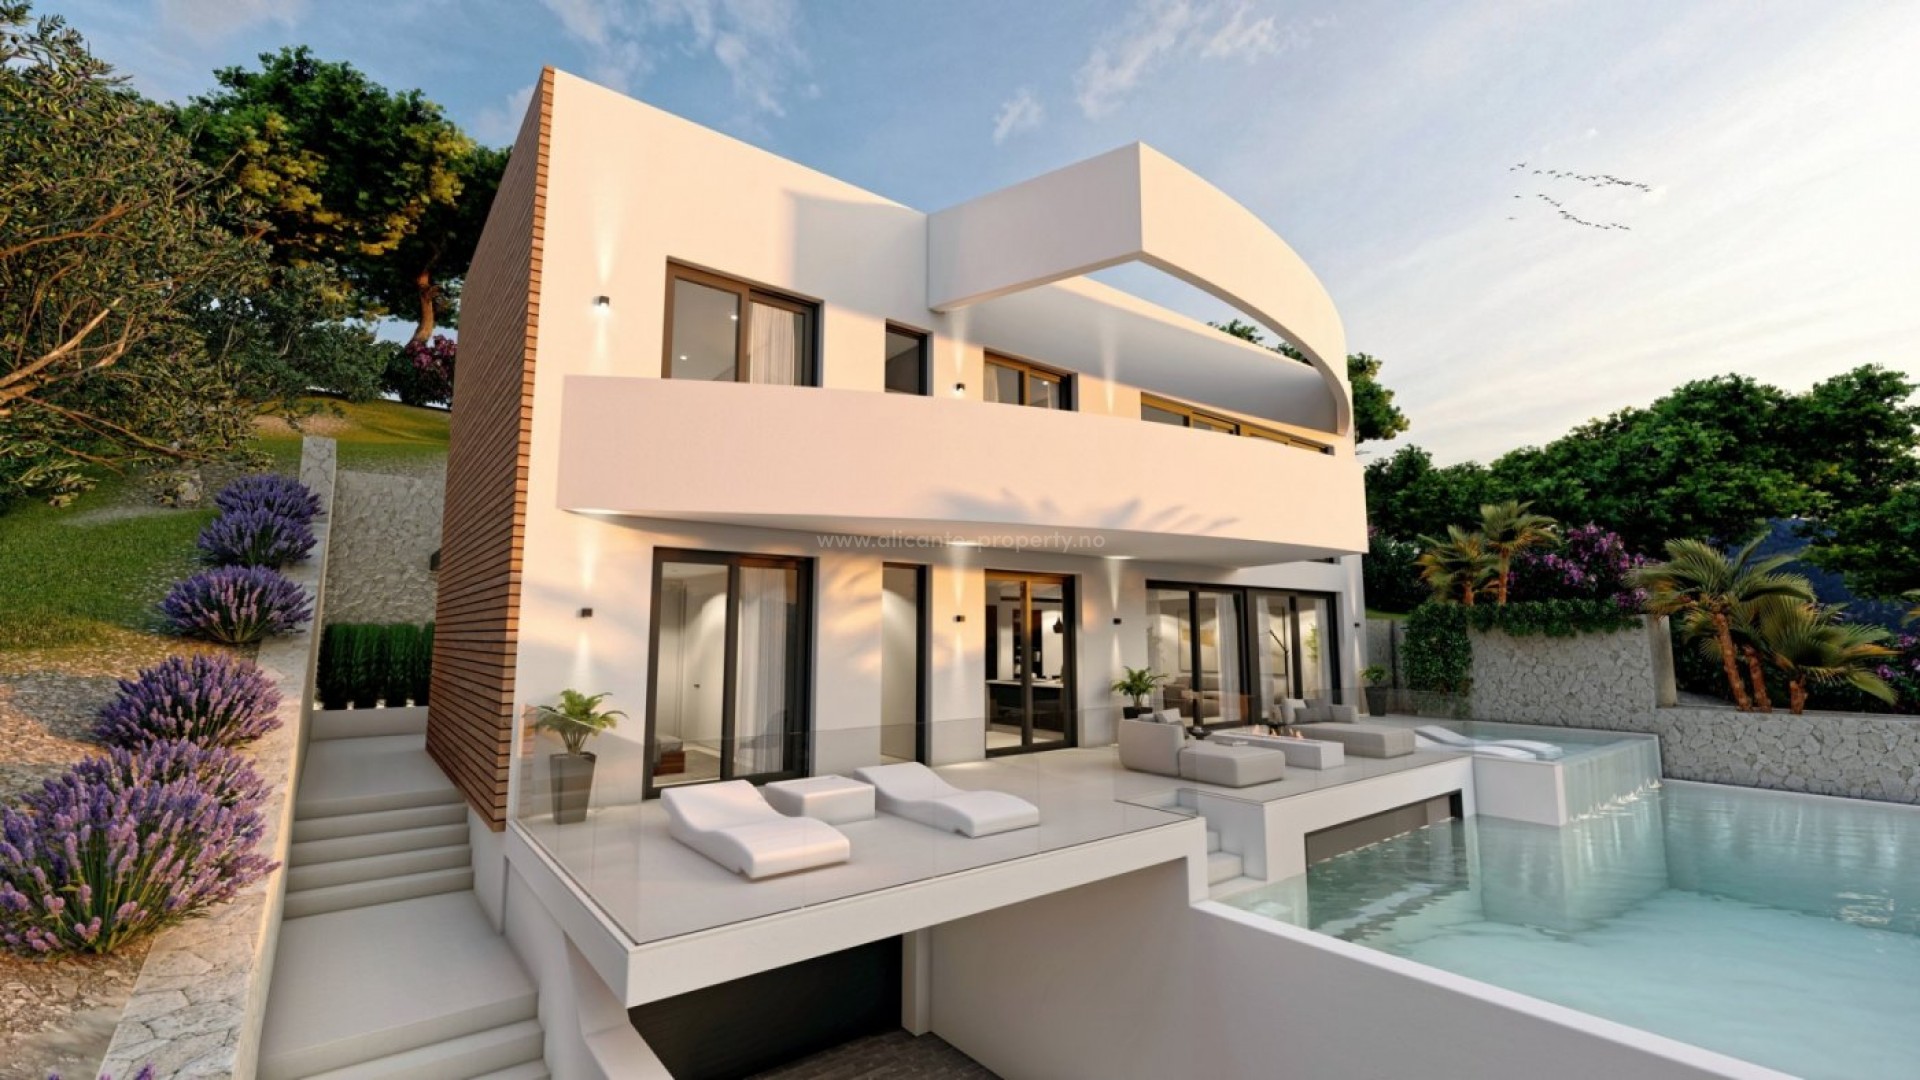 Luxury villa in Altea with 4 spacious bedrooms and 5 bathrooms, terrace at the rear of the property and a large pool terrace at the front with infinity pool